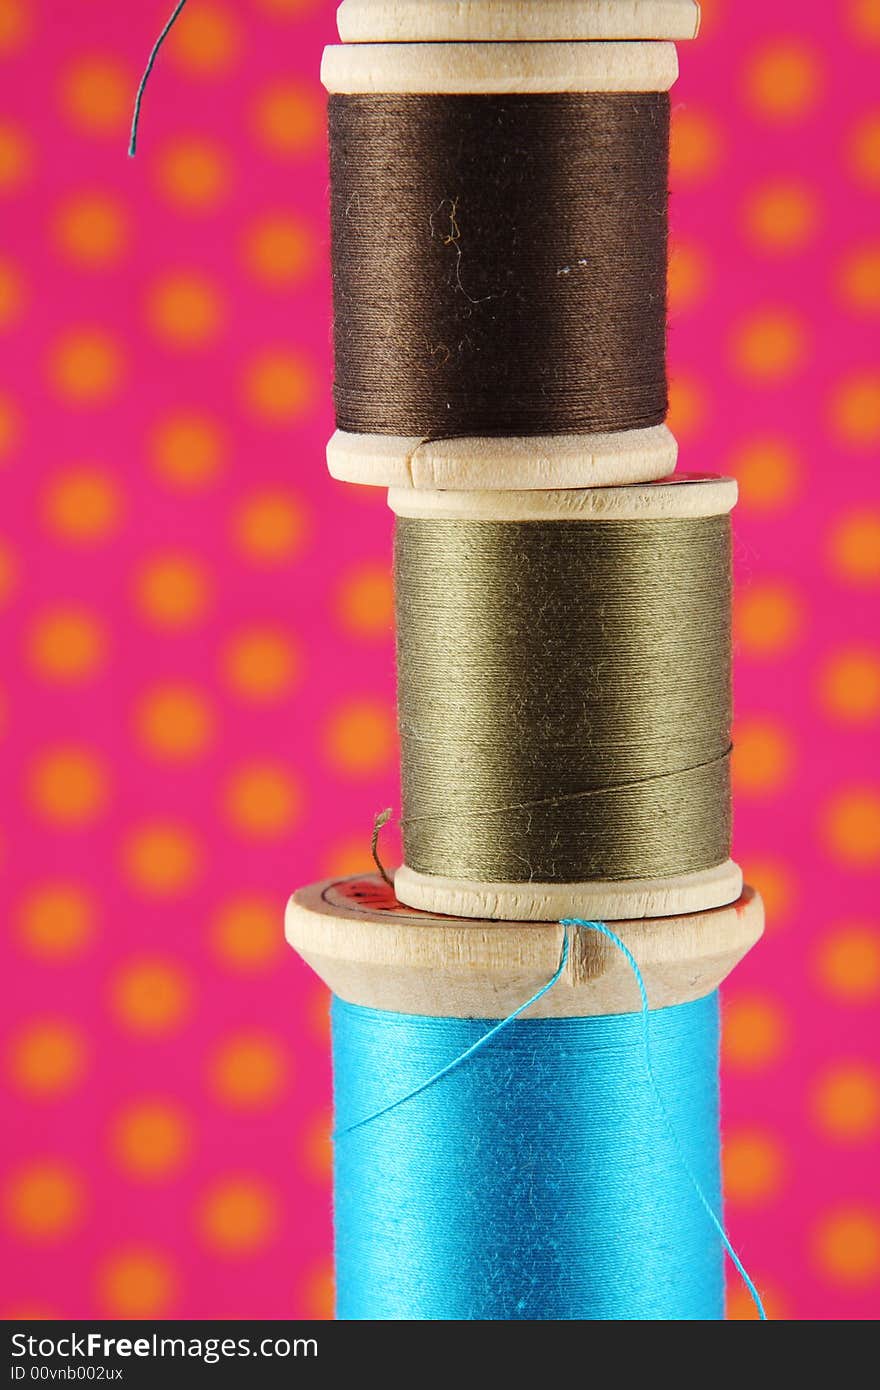 Spools of thread stacked in front of a bright polka dot background. Spools of thread stacked in front of a bright polka dot background